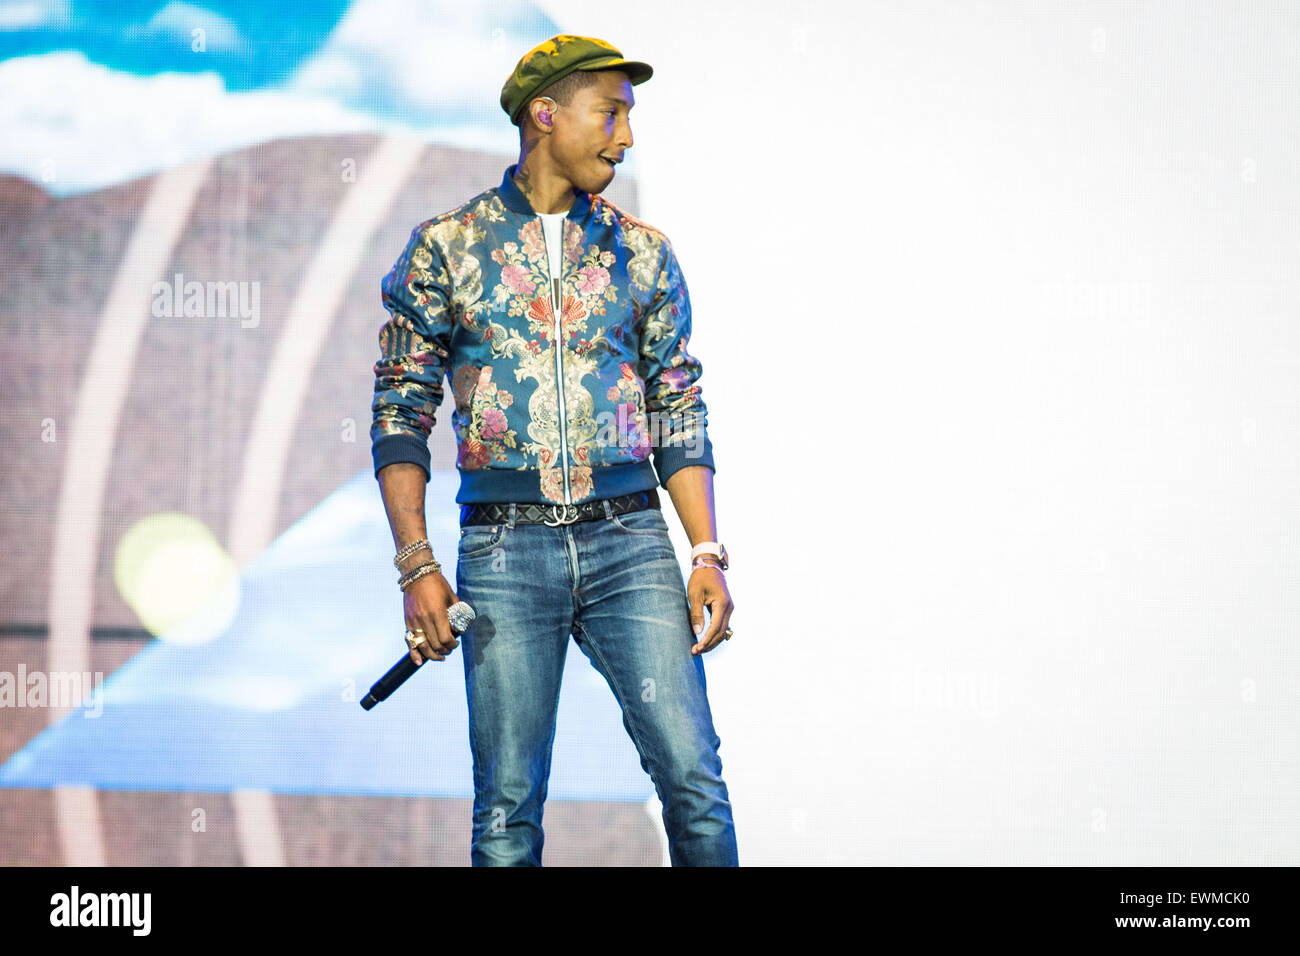 Pharrell Williams performs live at Pinkpop Festival 2015 in Netherlands © Roberto Finizio / Alamy News Stock Photo